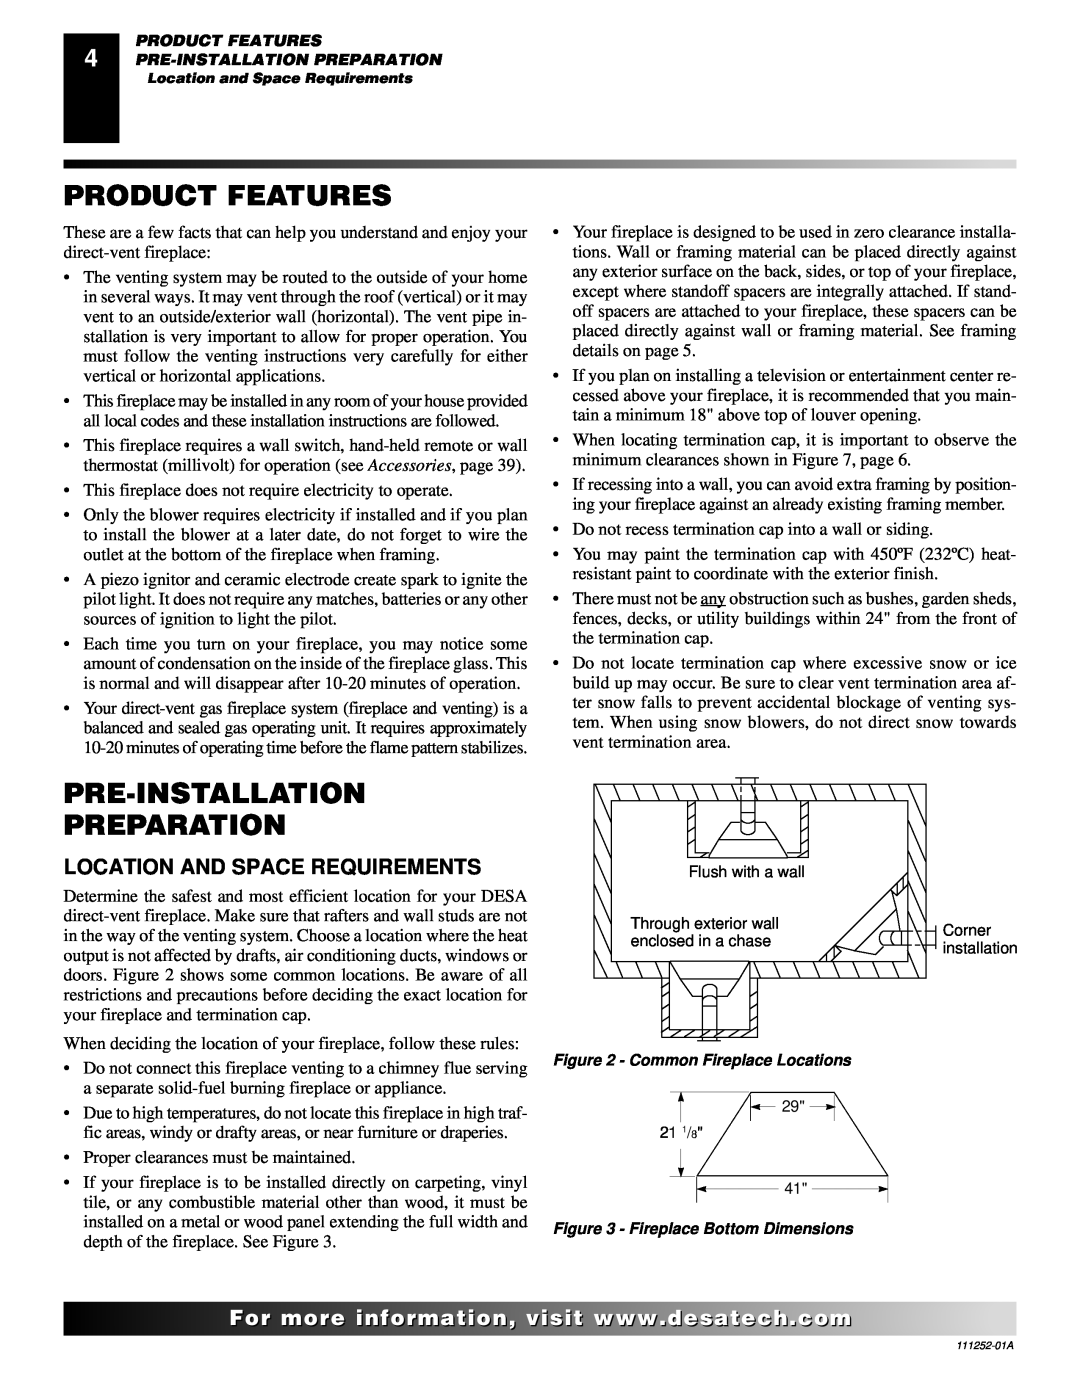 Desa CHDV36NRA installation manual Product Features, Pre-Installation Preparation, Location And Space Requirements 